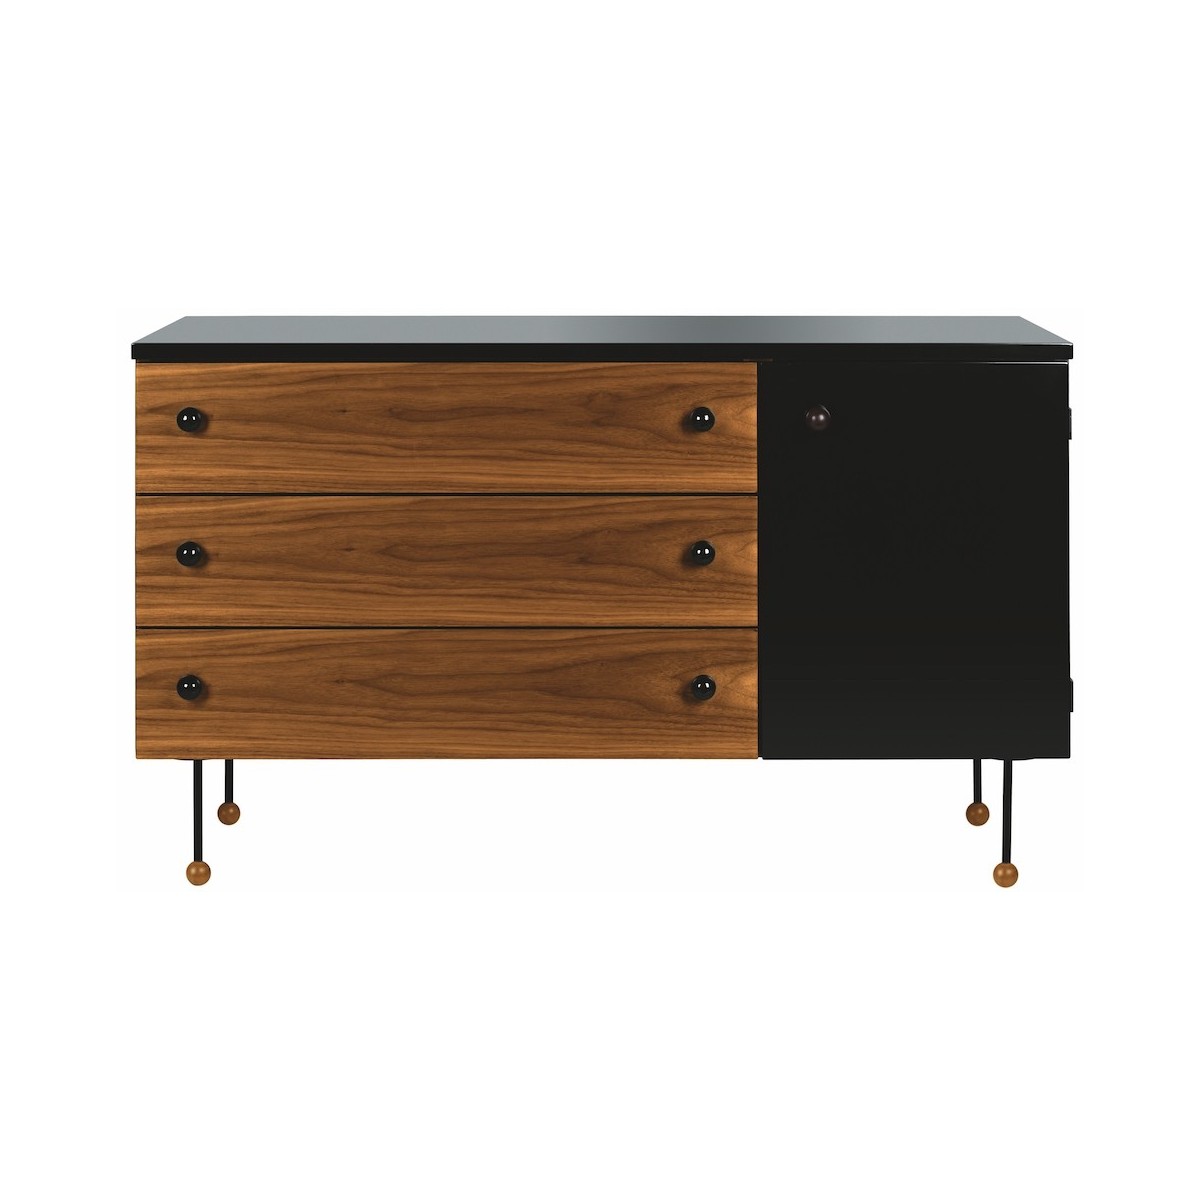 3 drawers, 1 sideboard - "62-collection" dresser